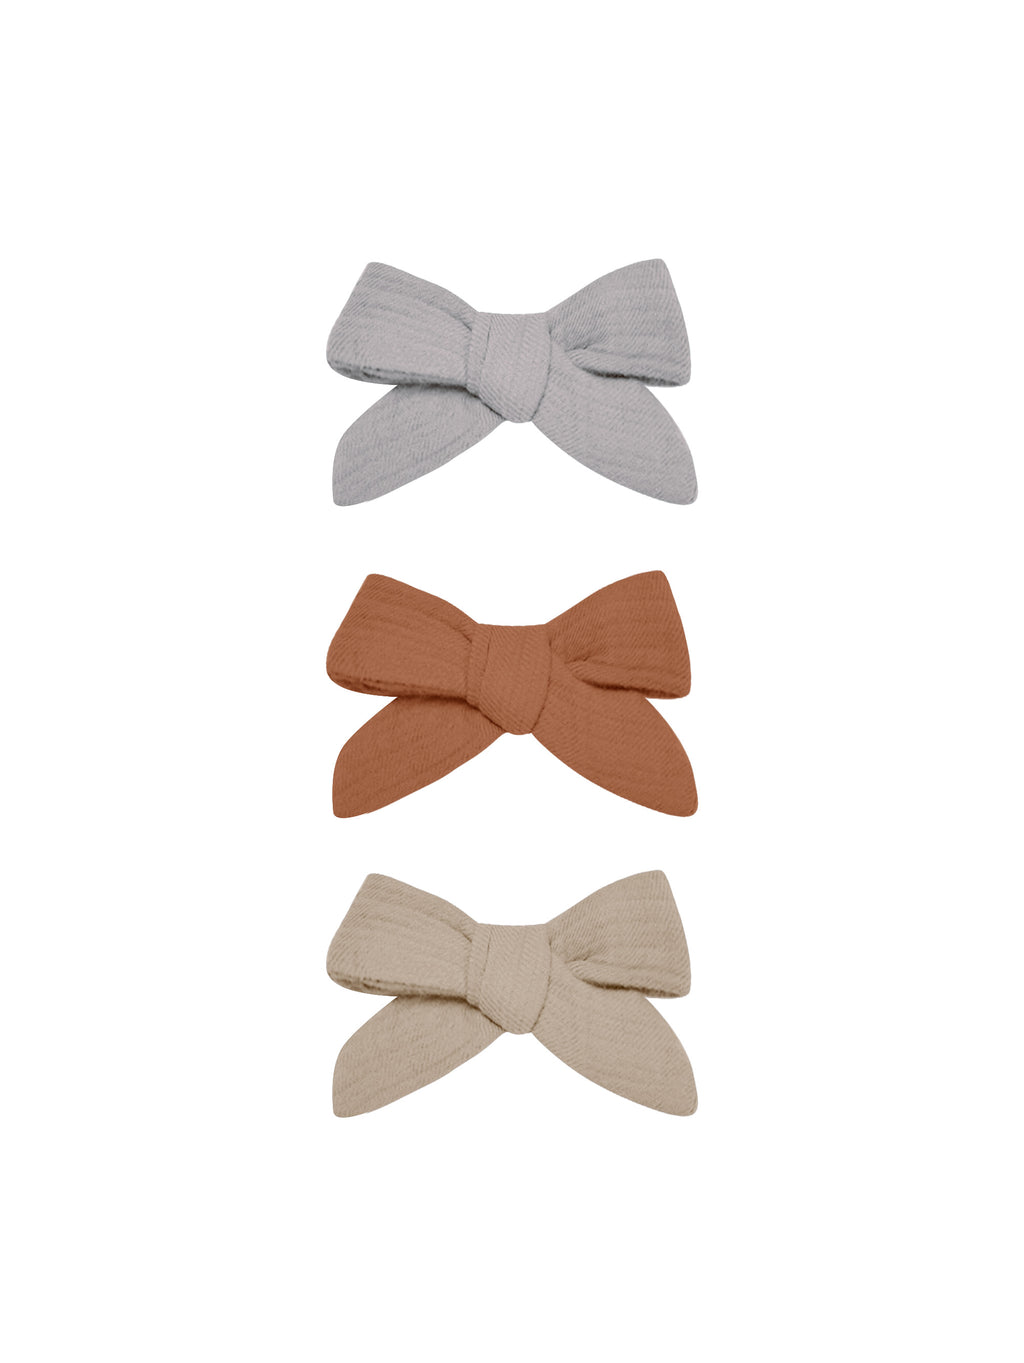 Quincy Mae Bow With Clip, Set Of 3 - Periwinkle, Clay, Oat